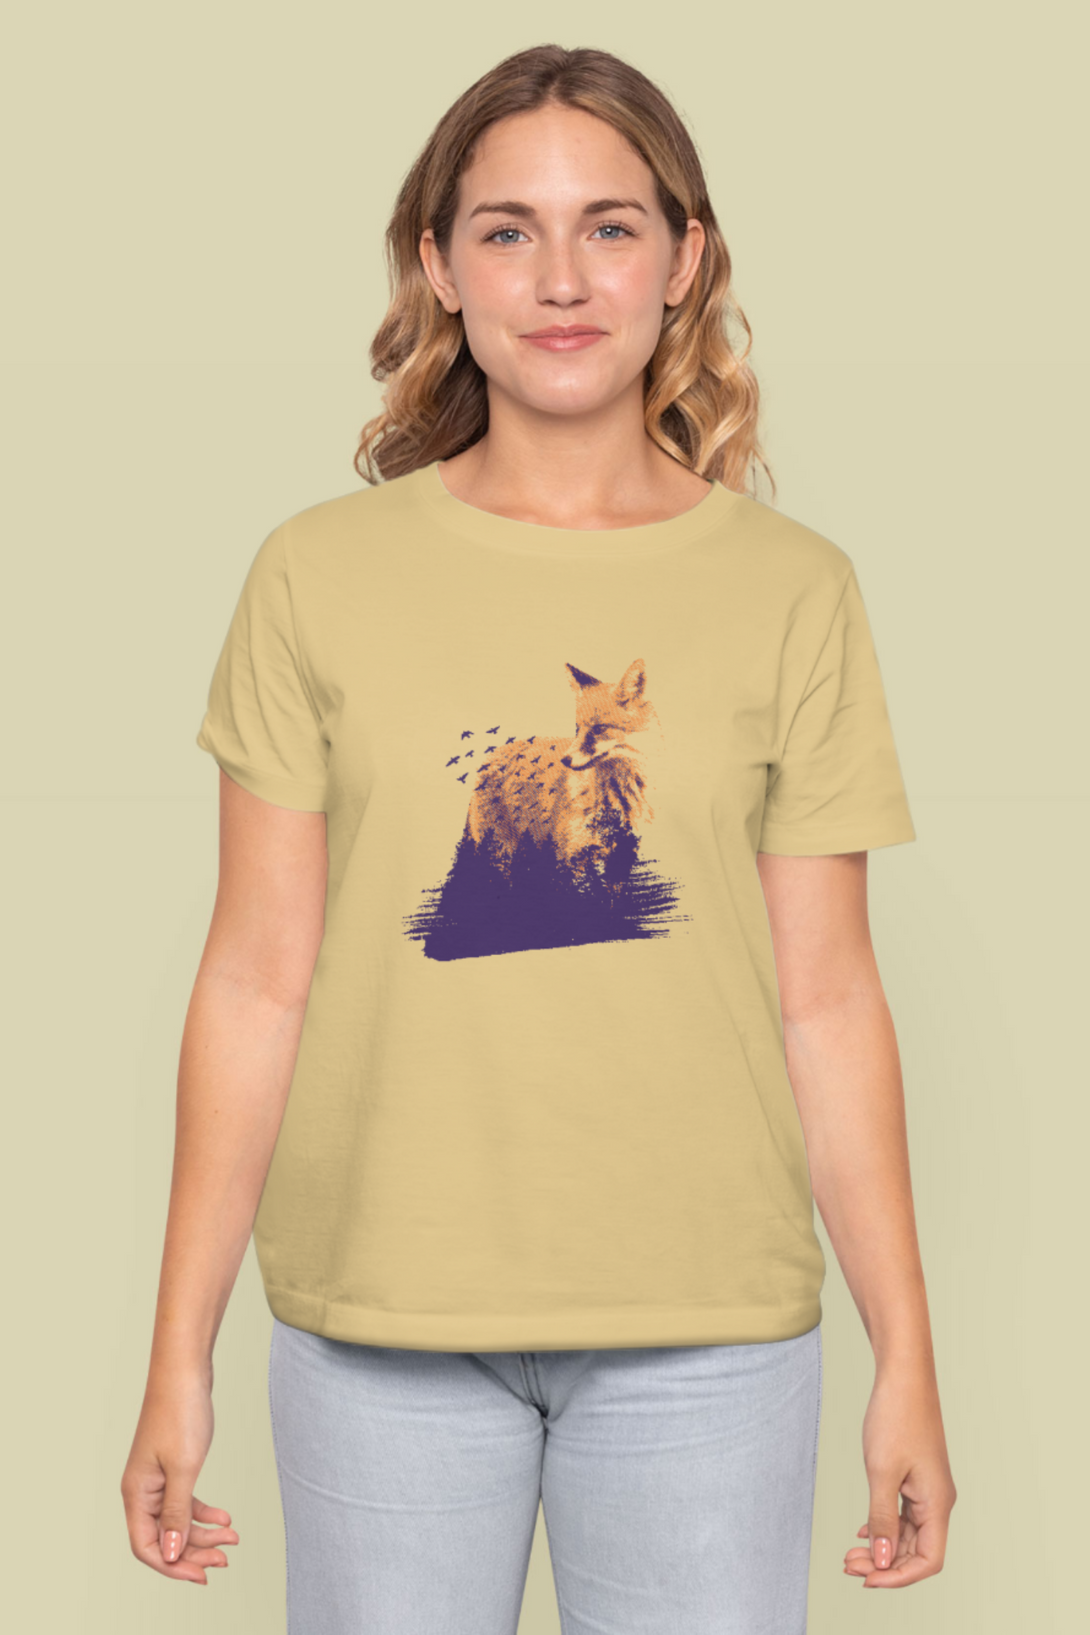 Forest Fox Printed T-Shirt For Women - WowWaves - 9